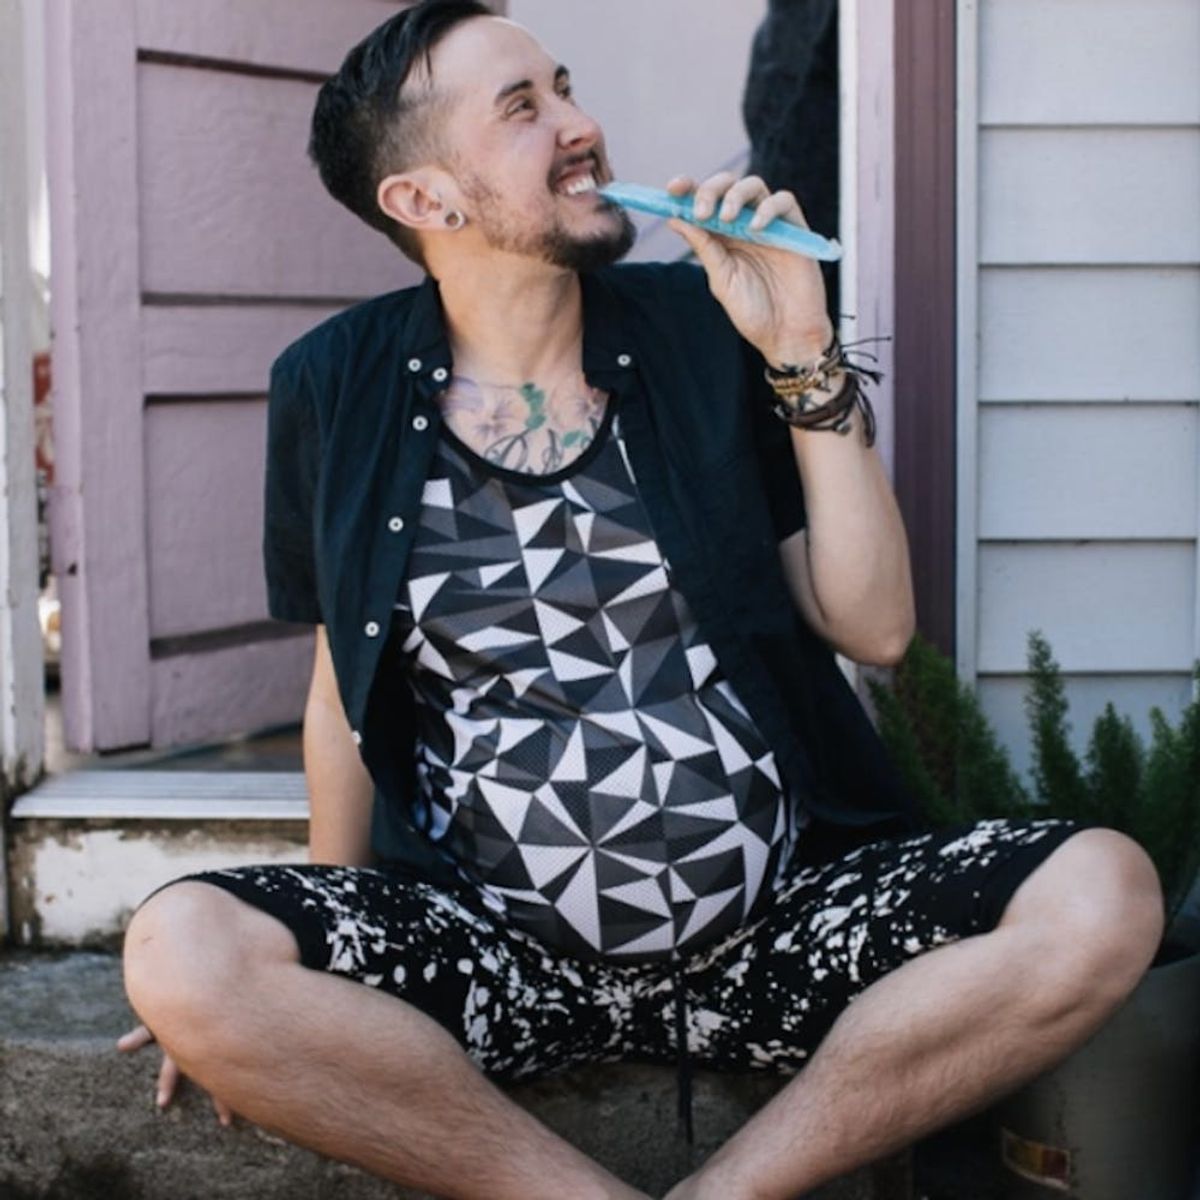 Meet the Pregnant Man Who Wants to Change the Way We See Trans Bodies